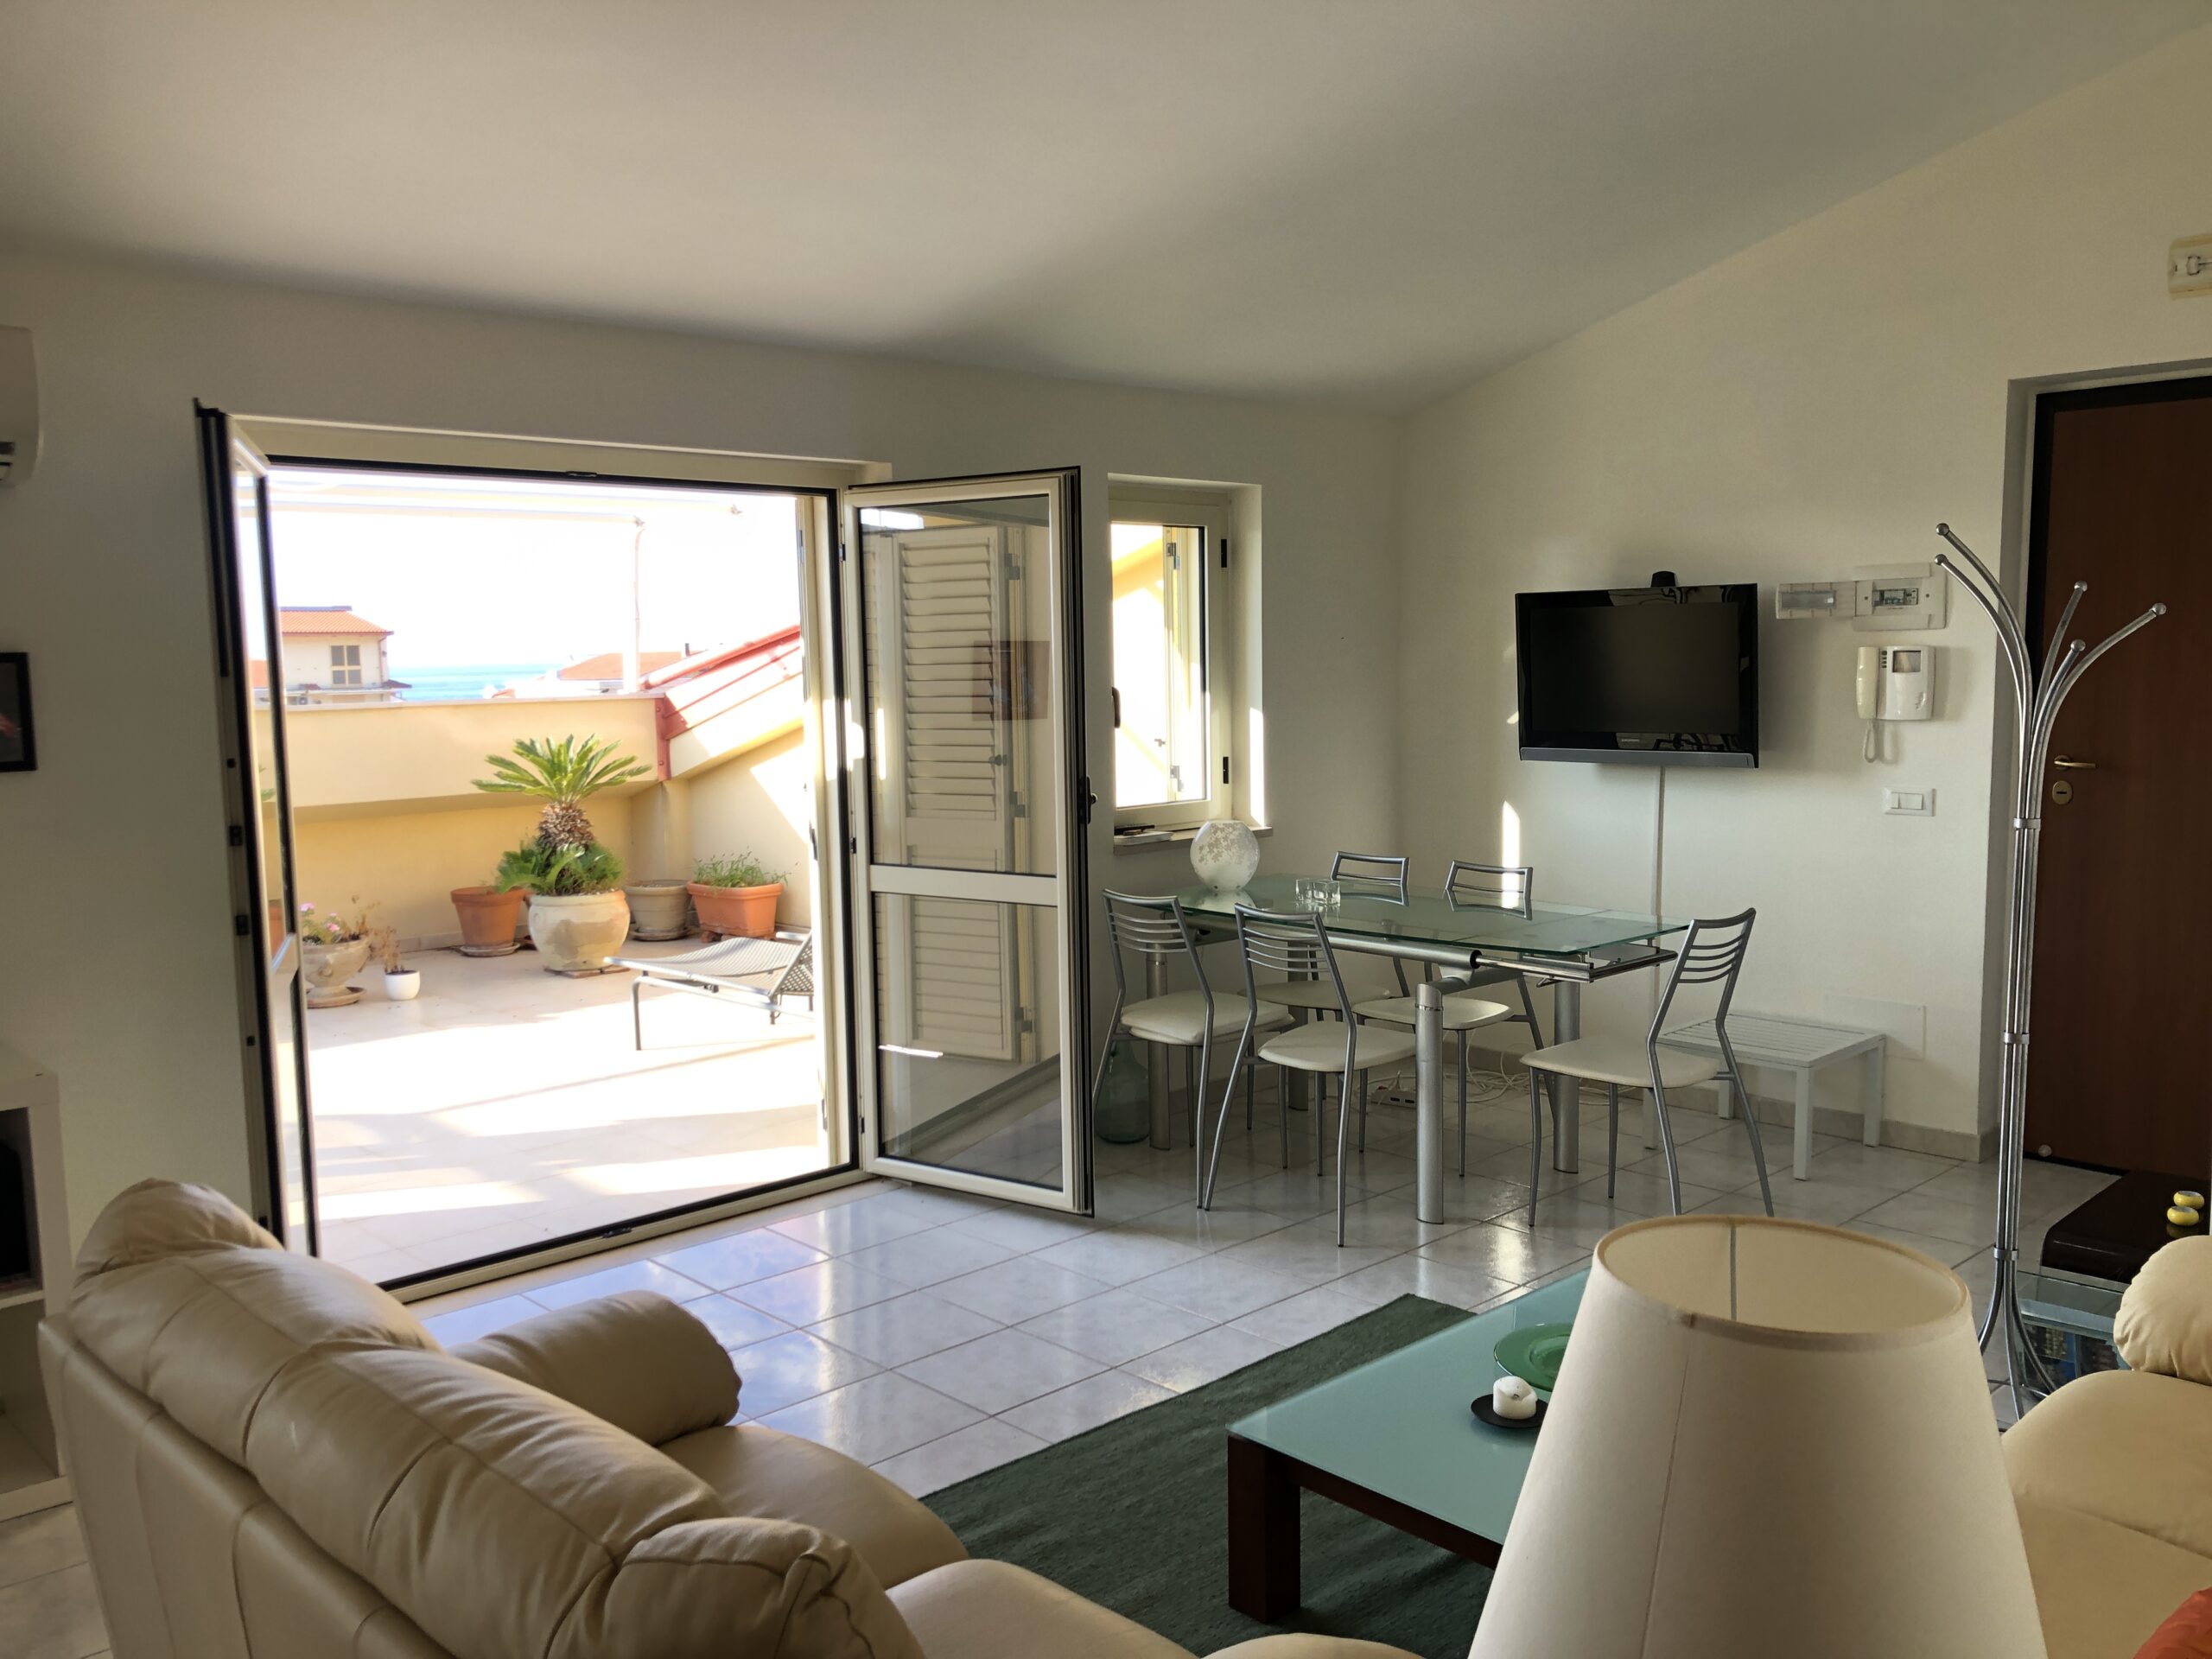 Penthouse apartment for sale located in Marinella Pizzo Calabria with sea views and large terrace and garage.